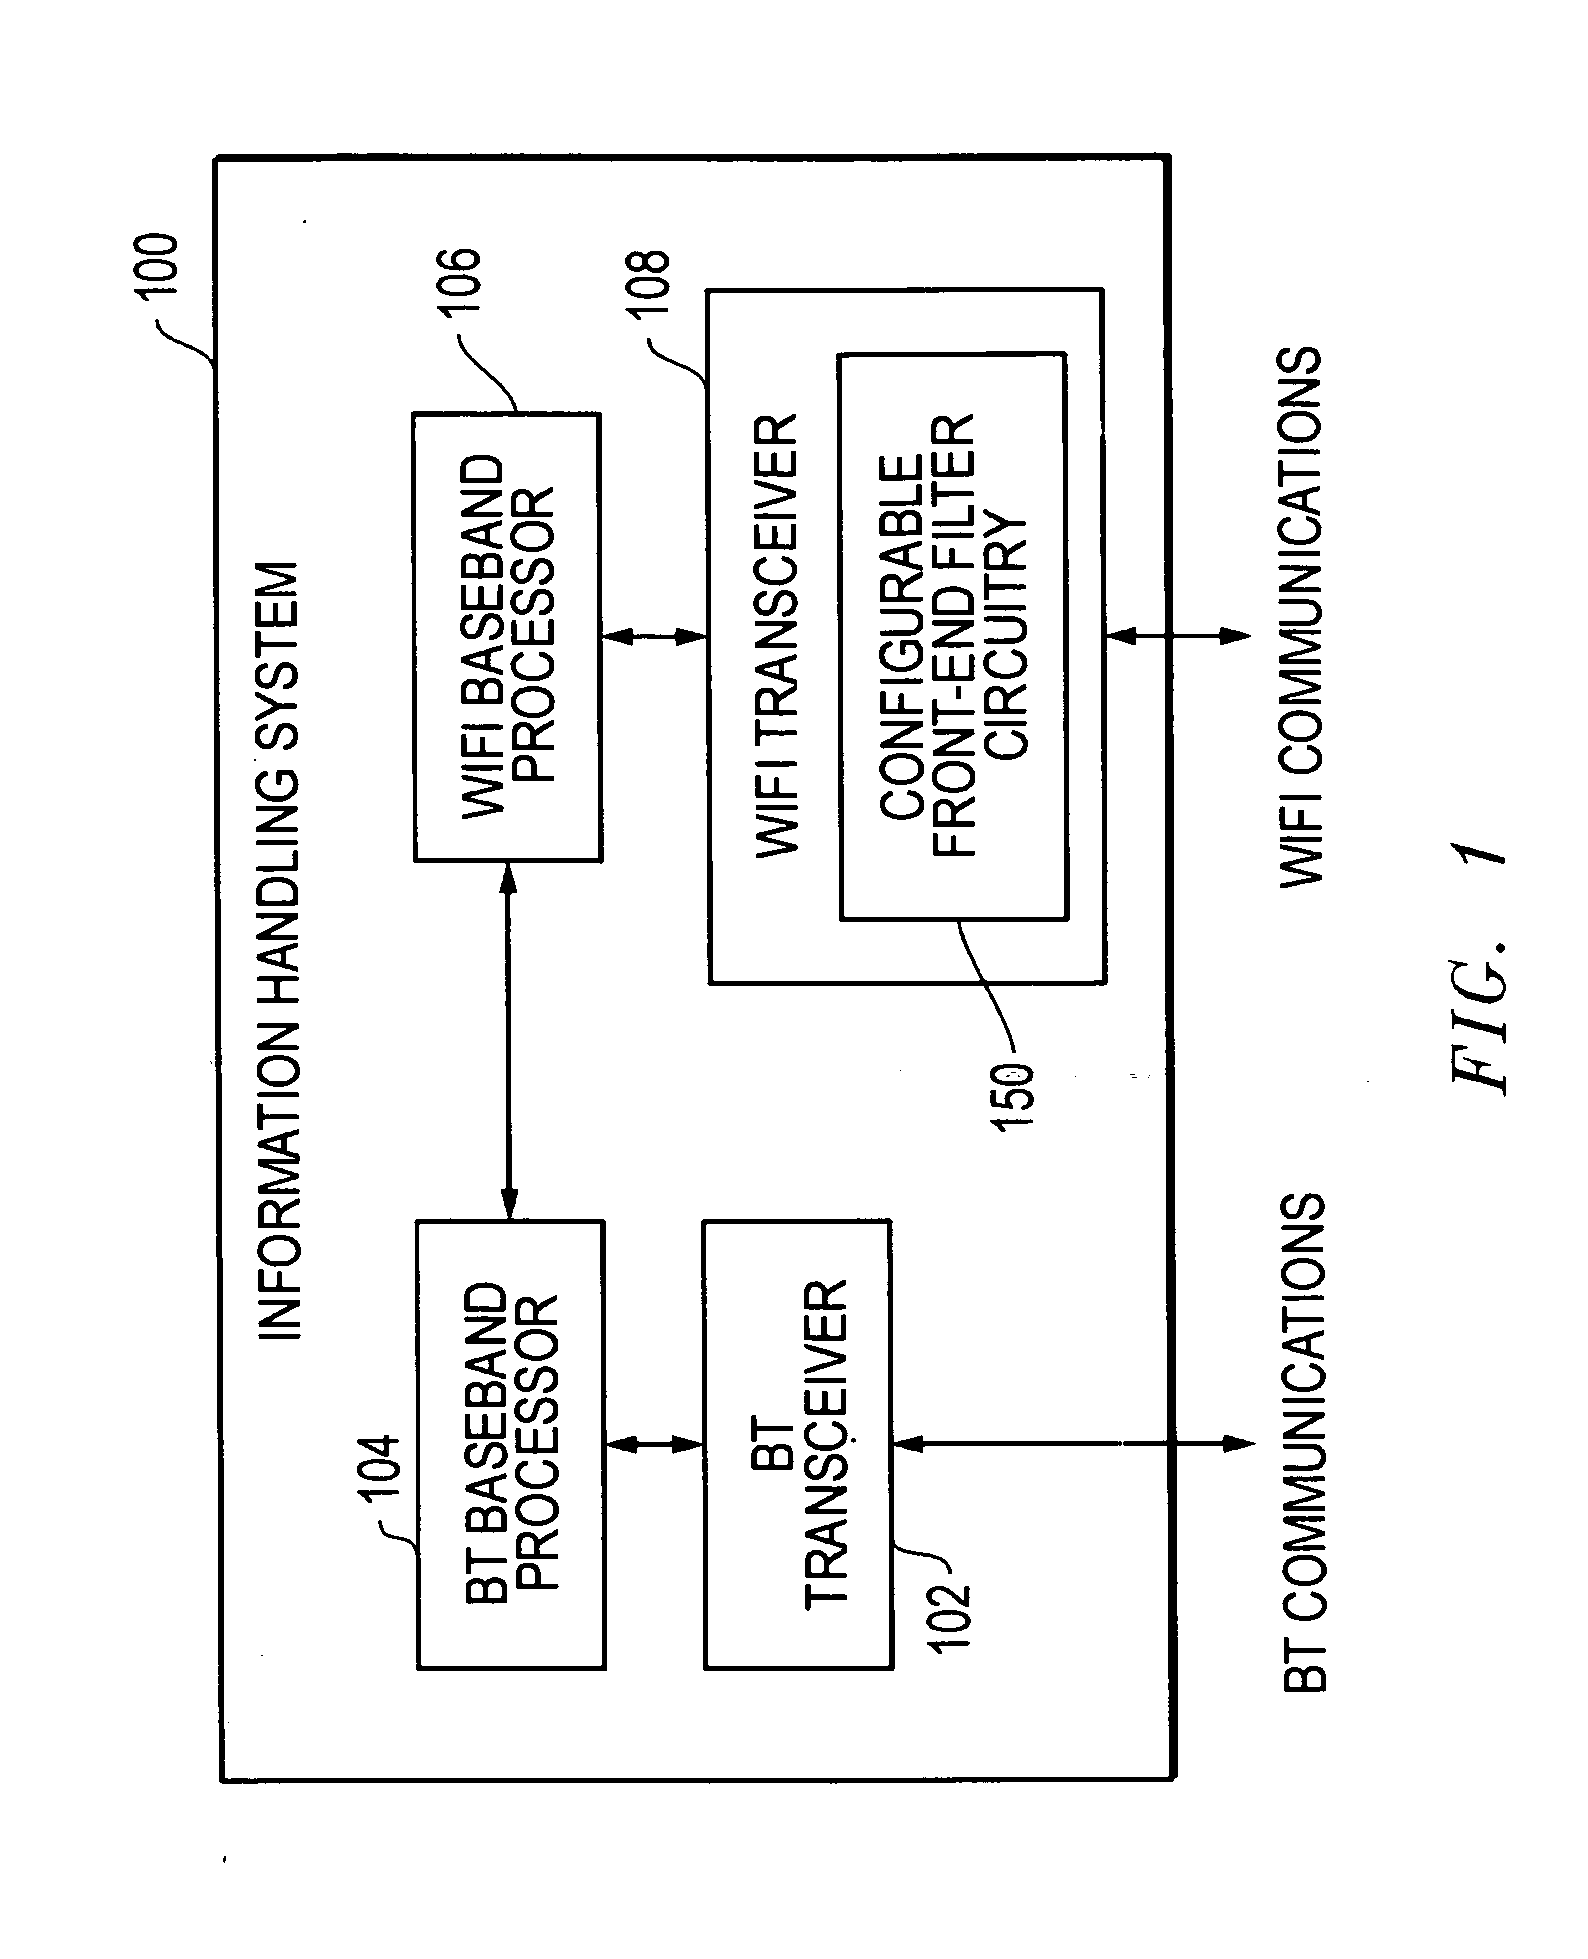 System and method for reducing signal interference between bluetooth and WLAN communications